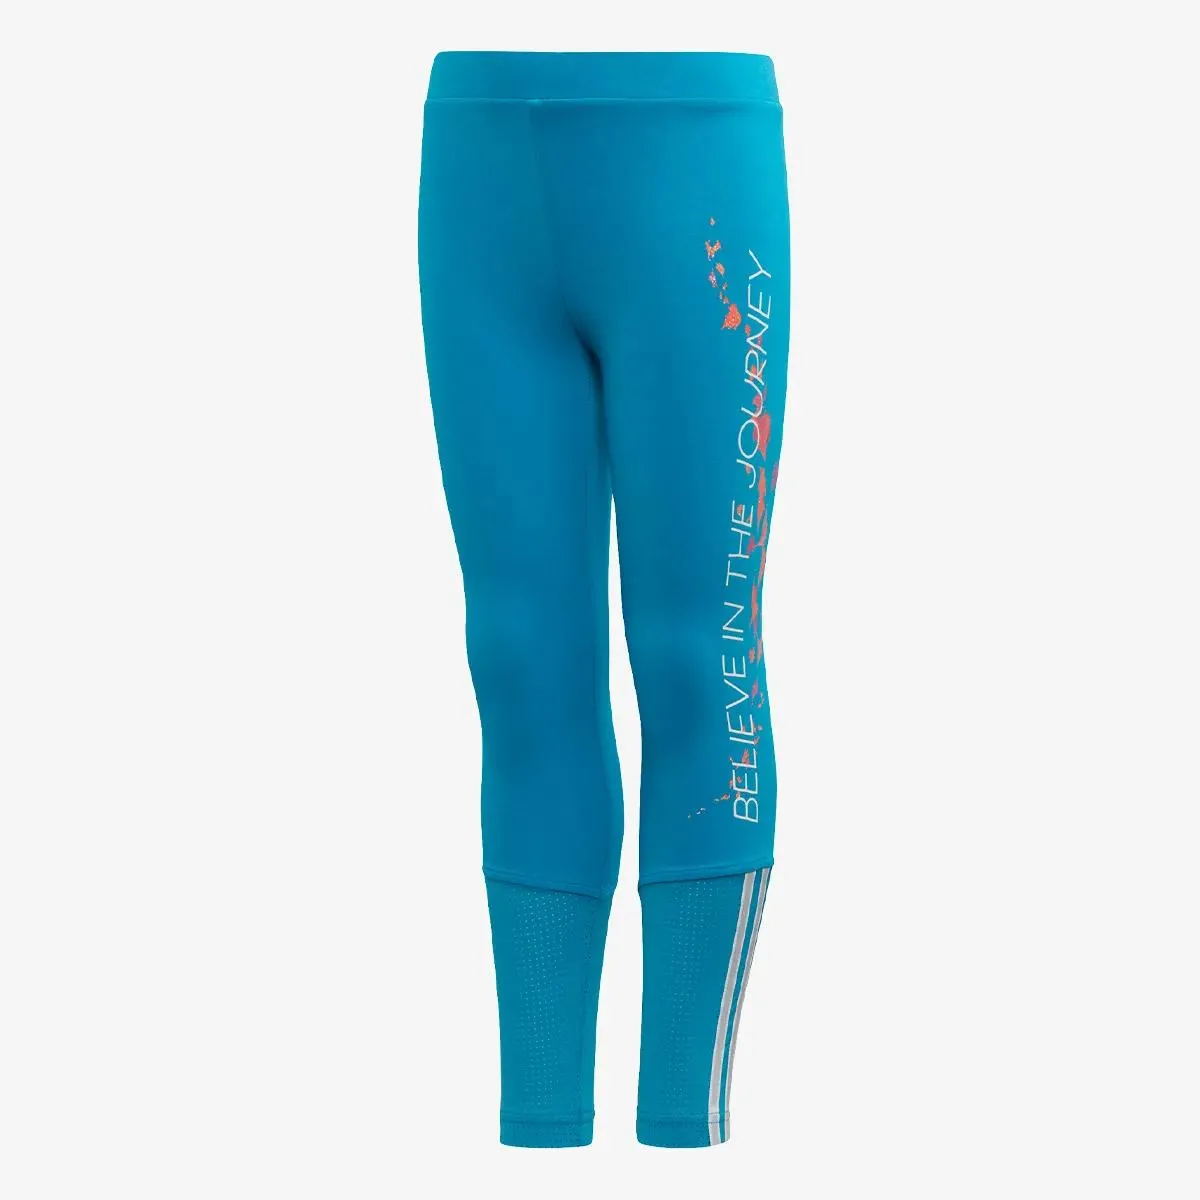 adidas ODJECA HELANKE LG DY FRO TIGHT 